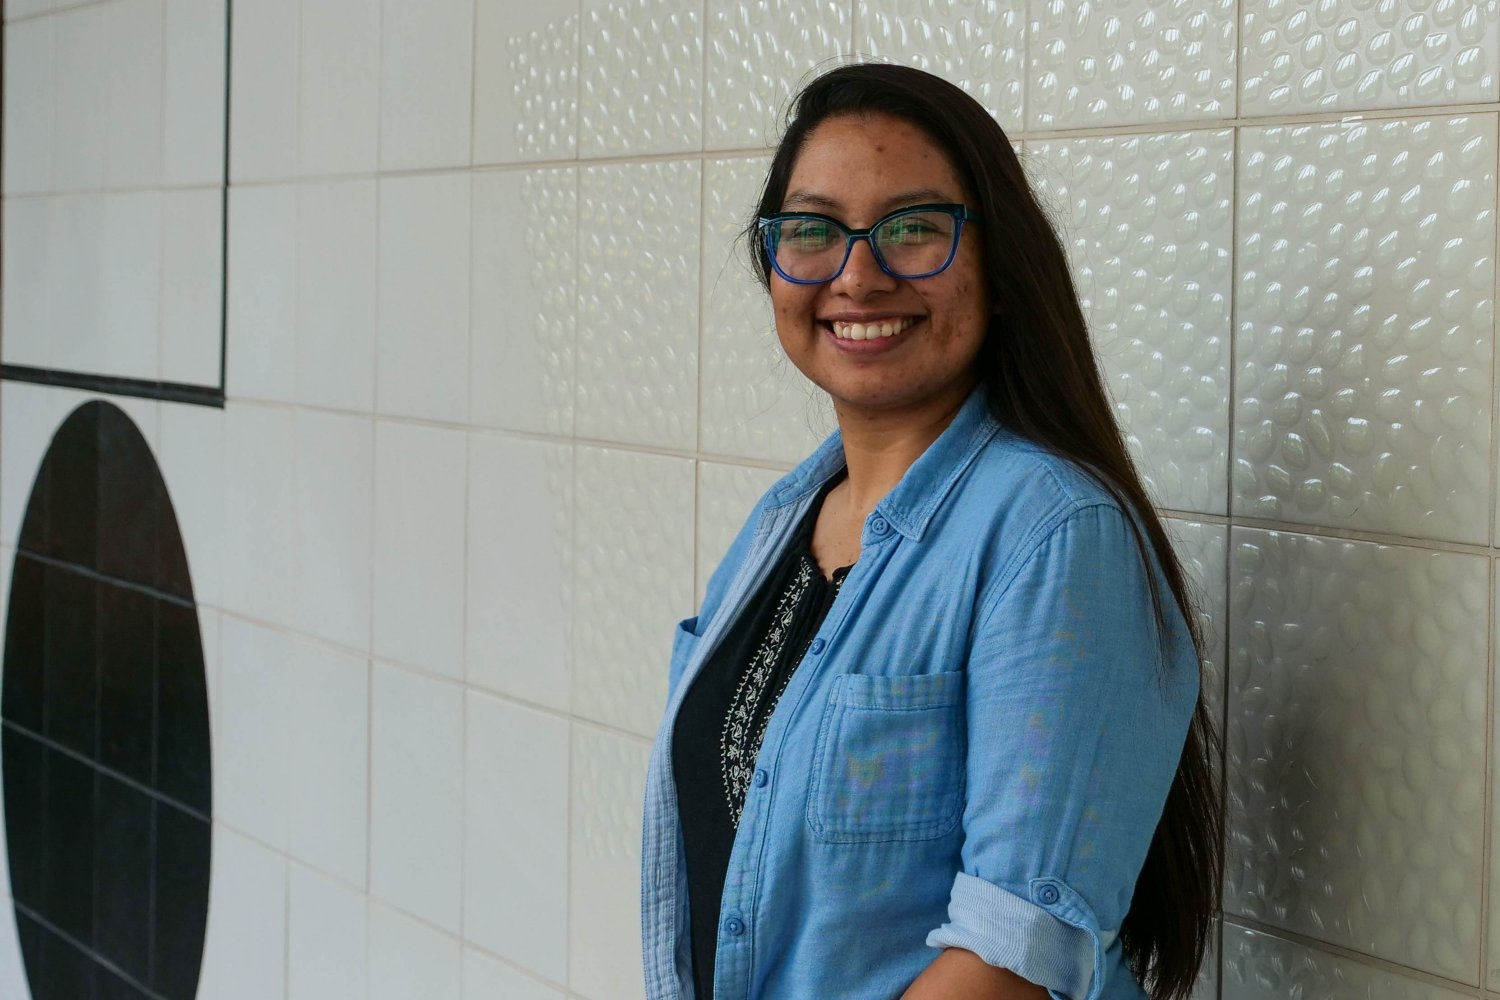 Avid baker and skilled cook Juana De La O, a graduate student in the Martin Lab in the Department of Biology, frequently draws on food metaphors when describing her research.